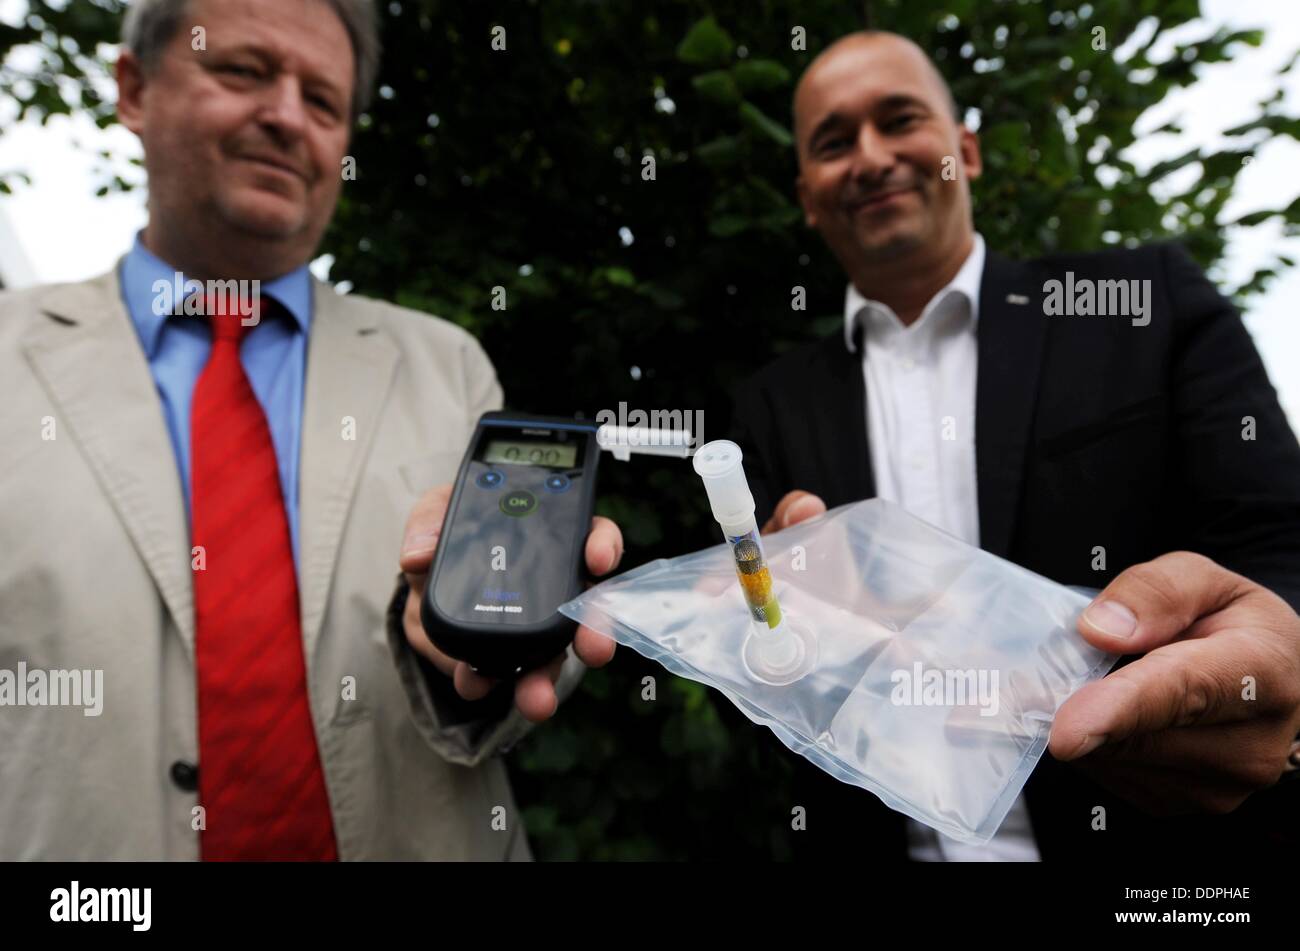 Product manager Juergen Sohege (L) and project manager Mirco Spitzbarth demonstrate first generation (L) and current model (R) portable alcohol testing devices made by the Draeger company in Luebeck, Germany, 22 August 2013. For 60 years, Draeger has been providing alcohol testing devices all over the world. Photo: Carsten Rehder Stock Photo